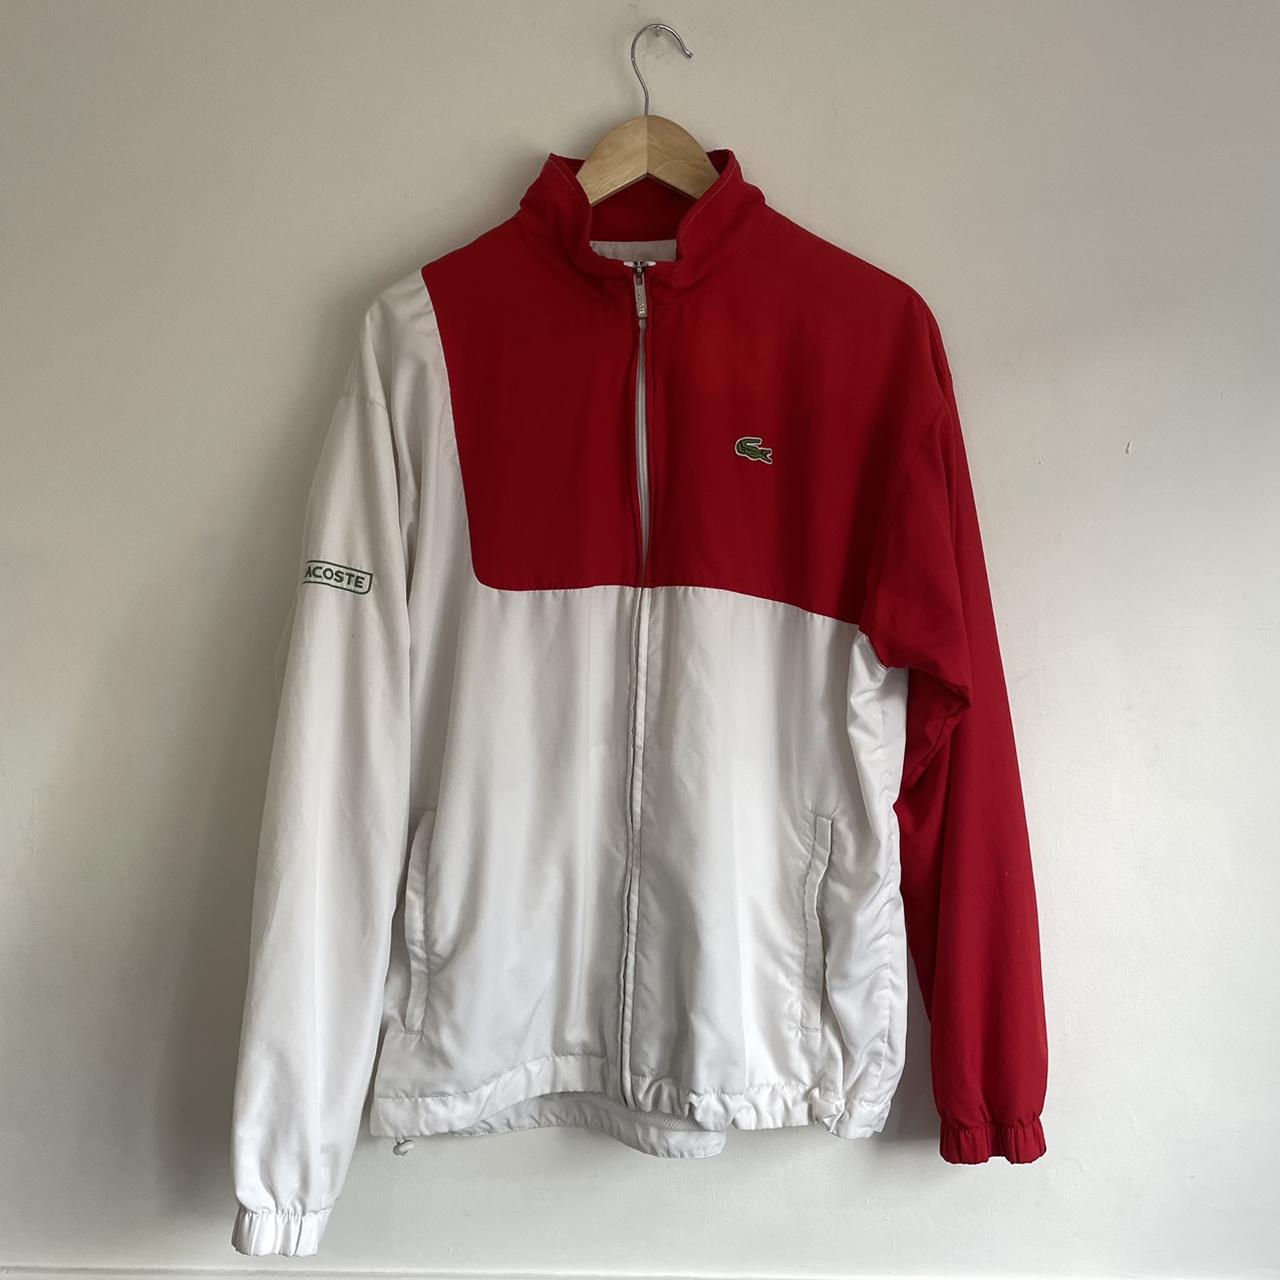 Signal Profit taxa Lacoste Track Jacket Red Supreme SS17 collab... - Depop